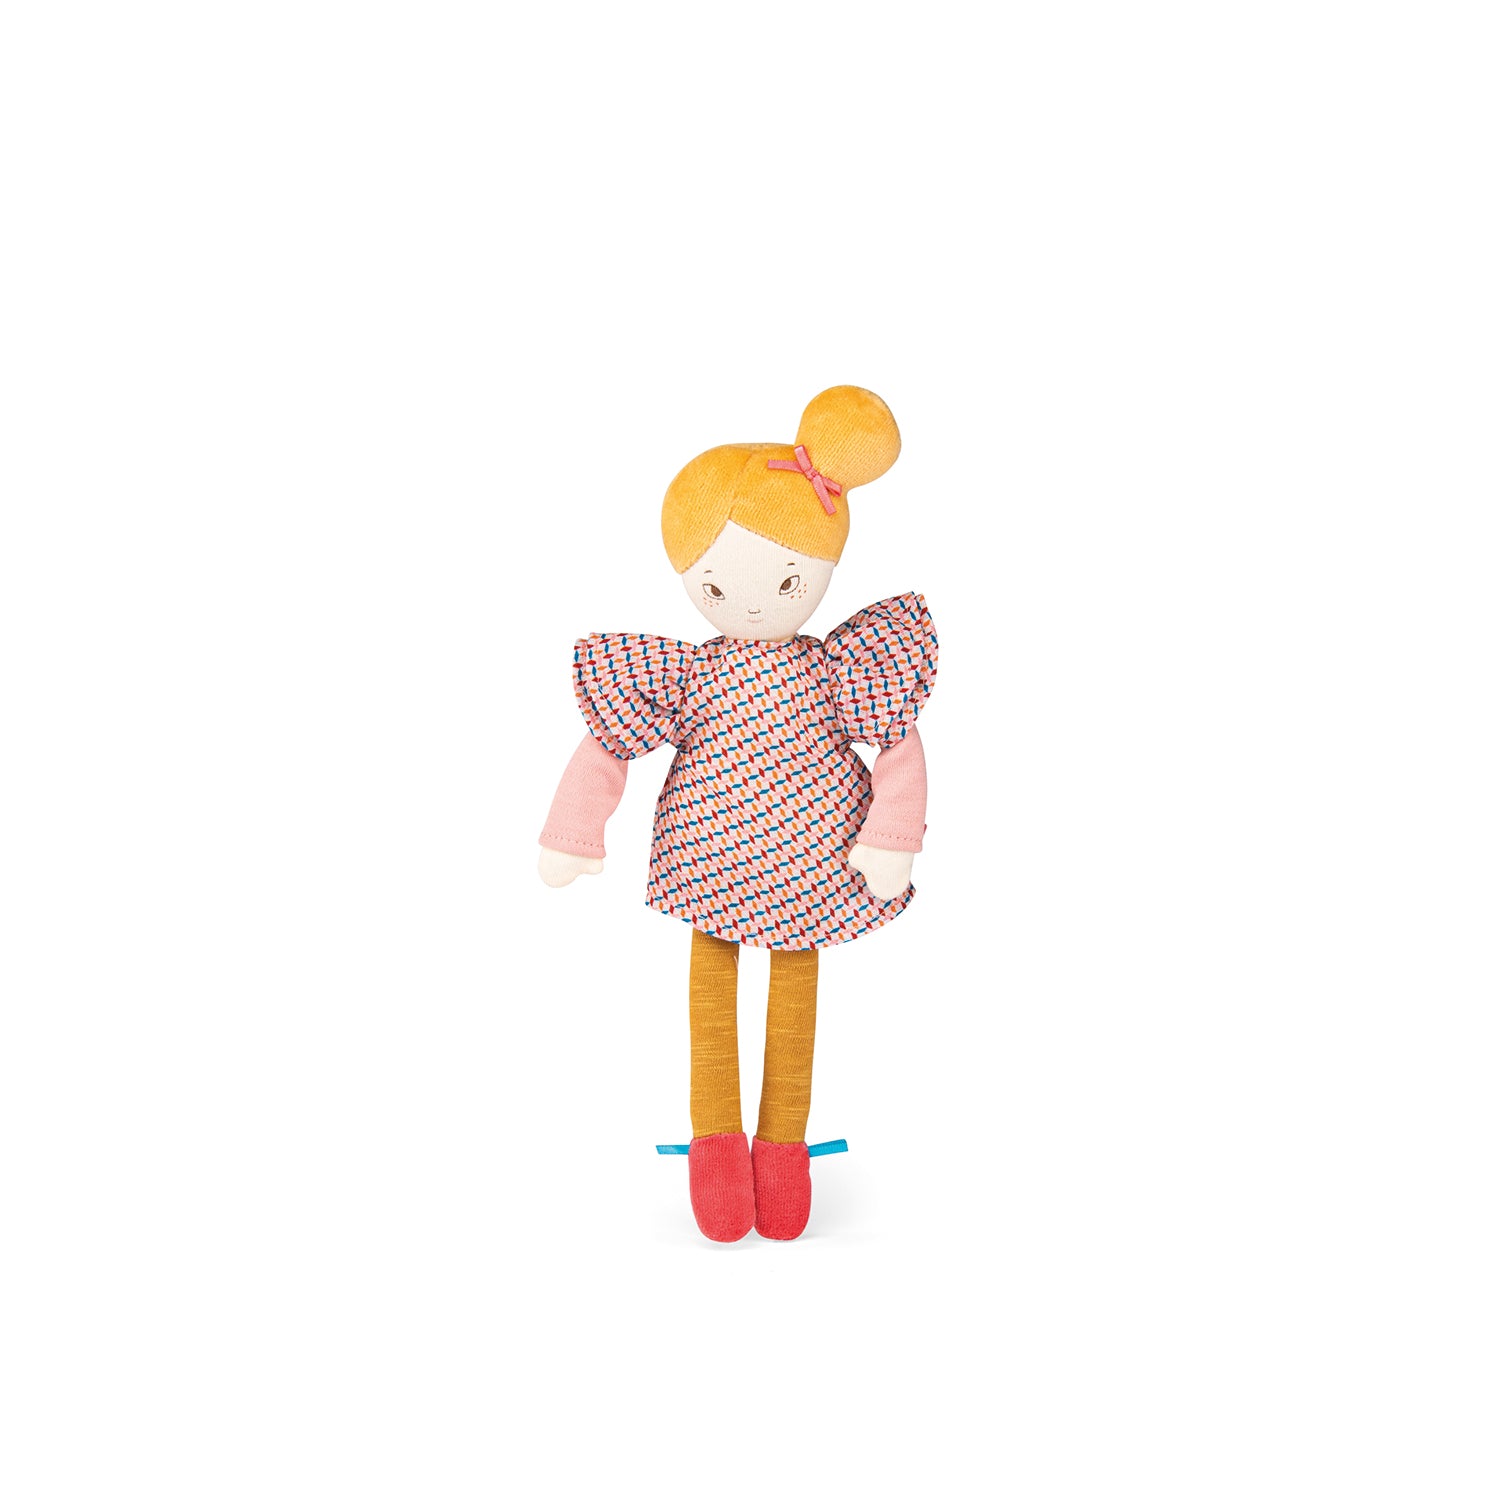 <h5>Description</h5>
<p>Mademoiselle Agathe is a sophisticated doll typically fashioned for strolls around Paris.<br> For the bright days, she has paired a pink puff-sleeve dress dotted with a delicate design, mustard jersey leggings and has her hair up in a bun.  </p>
<h5>Specifications</h5>
<p> <strong>Color</strong>: Multicolored<br><strong>Recommended Age</strong>: 1+<br><strong>Material</strong>: Cotton, Polyester<br><strong>Size (inches)</strong>: L: 3 x W: 10 x H: 1<br><strong>Weight (lbs)</strong>: 0,08<br><strong>Care instructions</strong>: Machine washable at 30°C on wool cycle.No tumble dry.</p>
